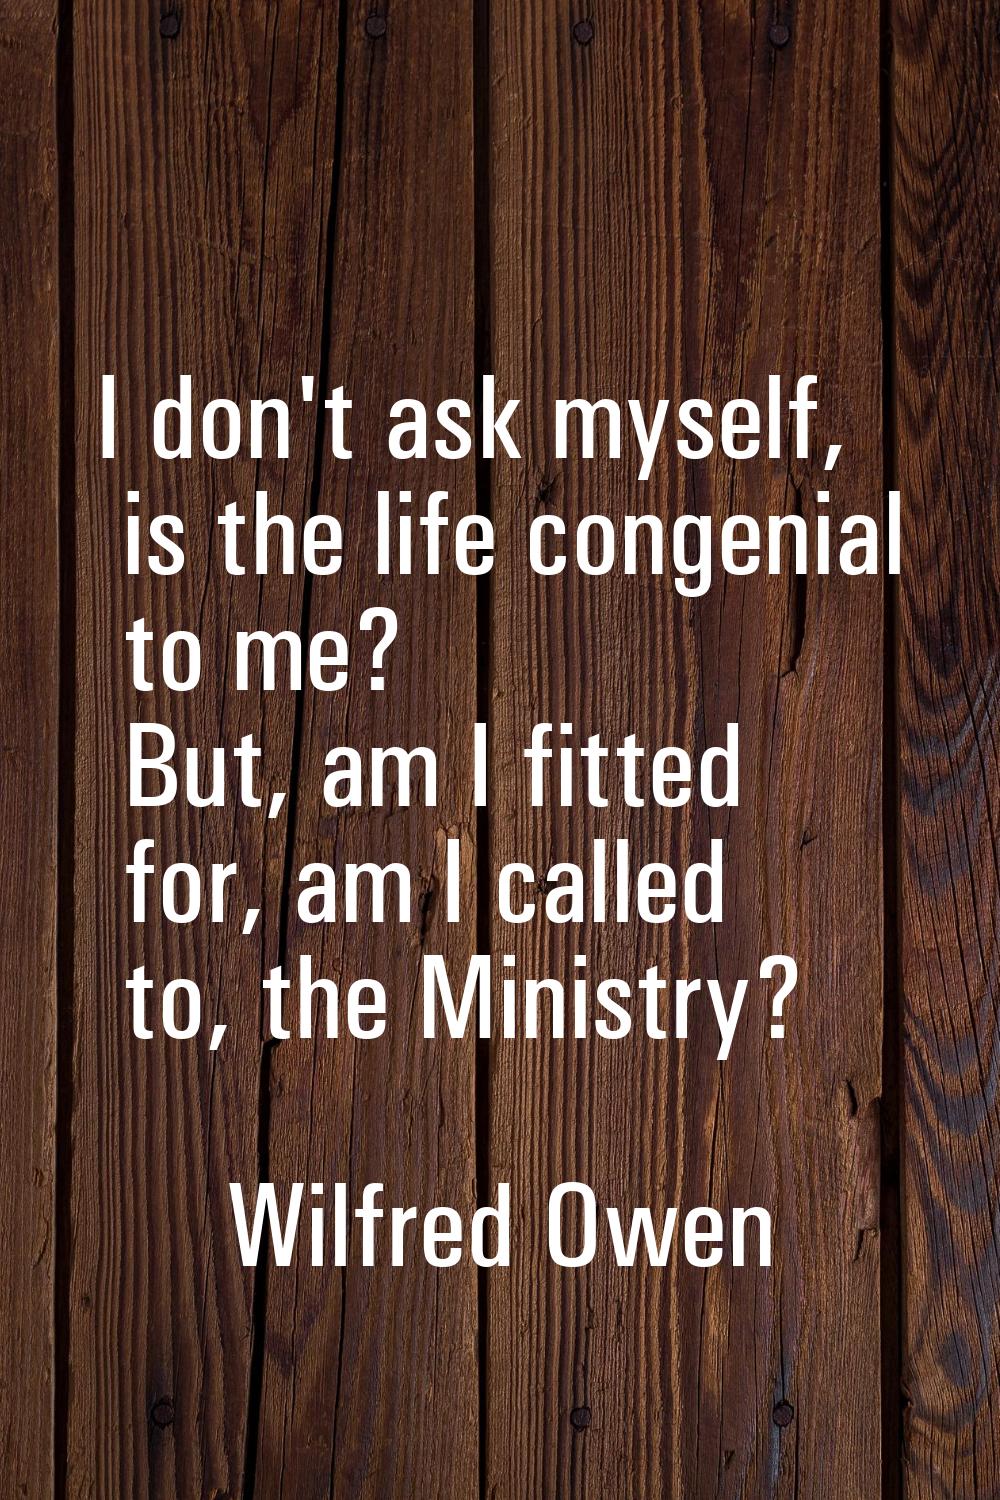 I don't ask myself, is the life congenial to me? But, am I fitted for, am I called to, the Ministry